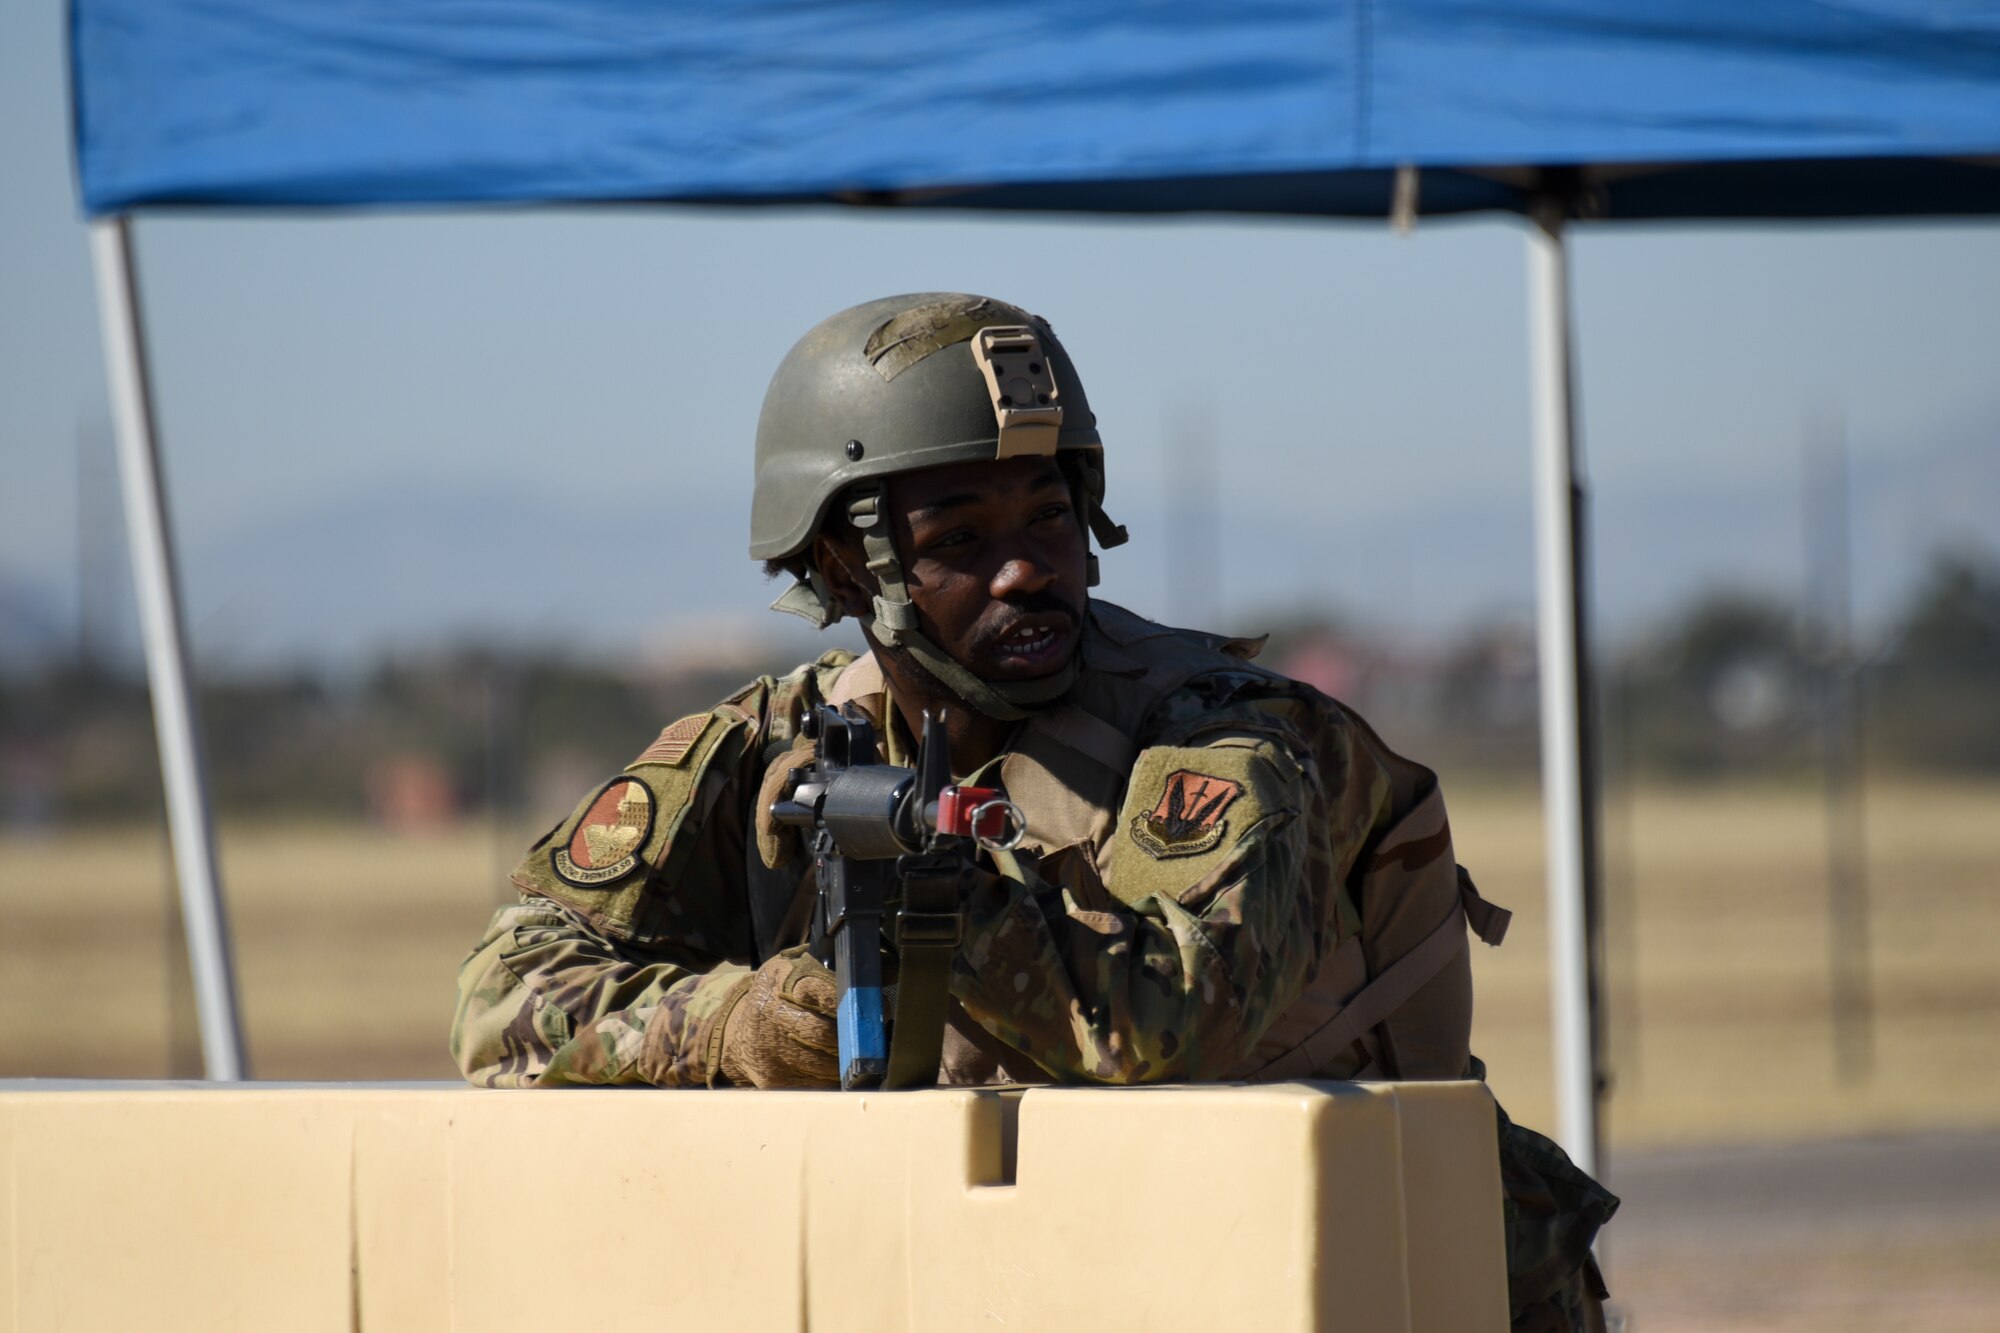 A photo of an Airman guarding an entry control point.